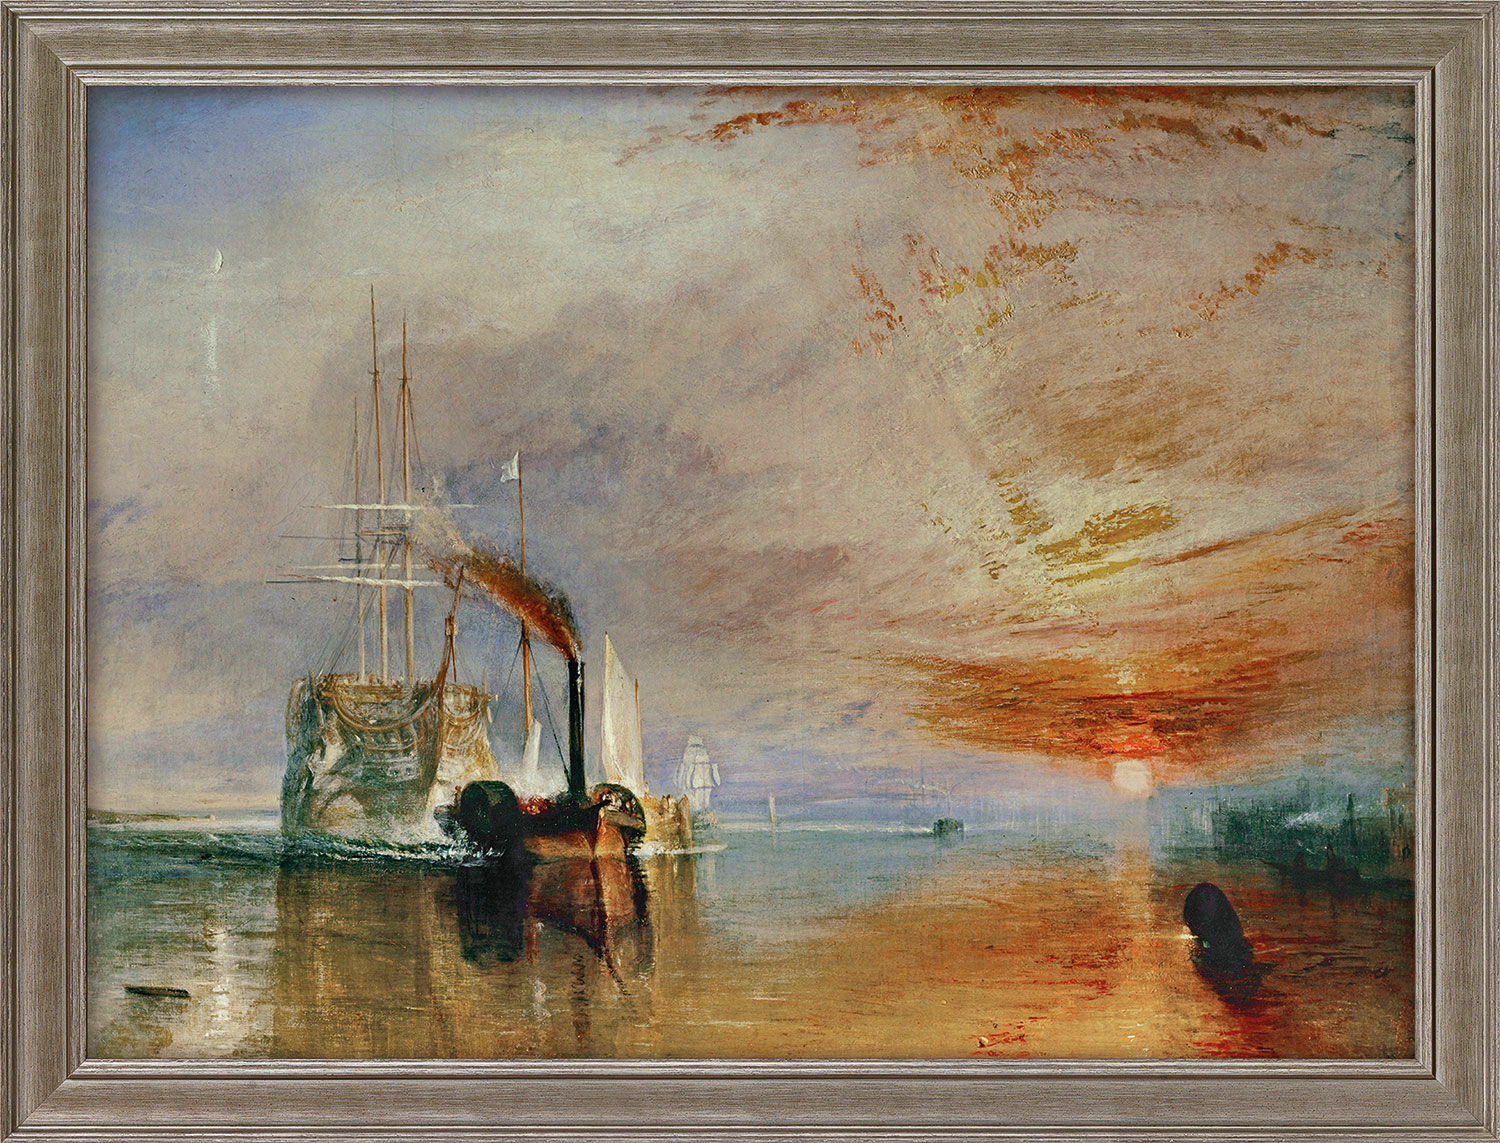 Picture "The Fighting Temeraire" (1839), framed by William Turner